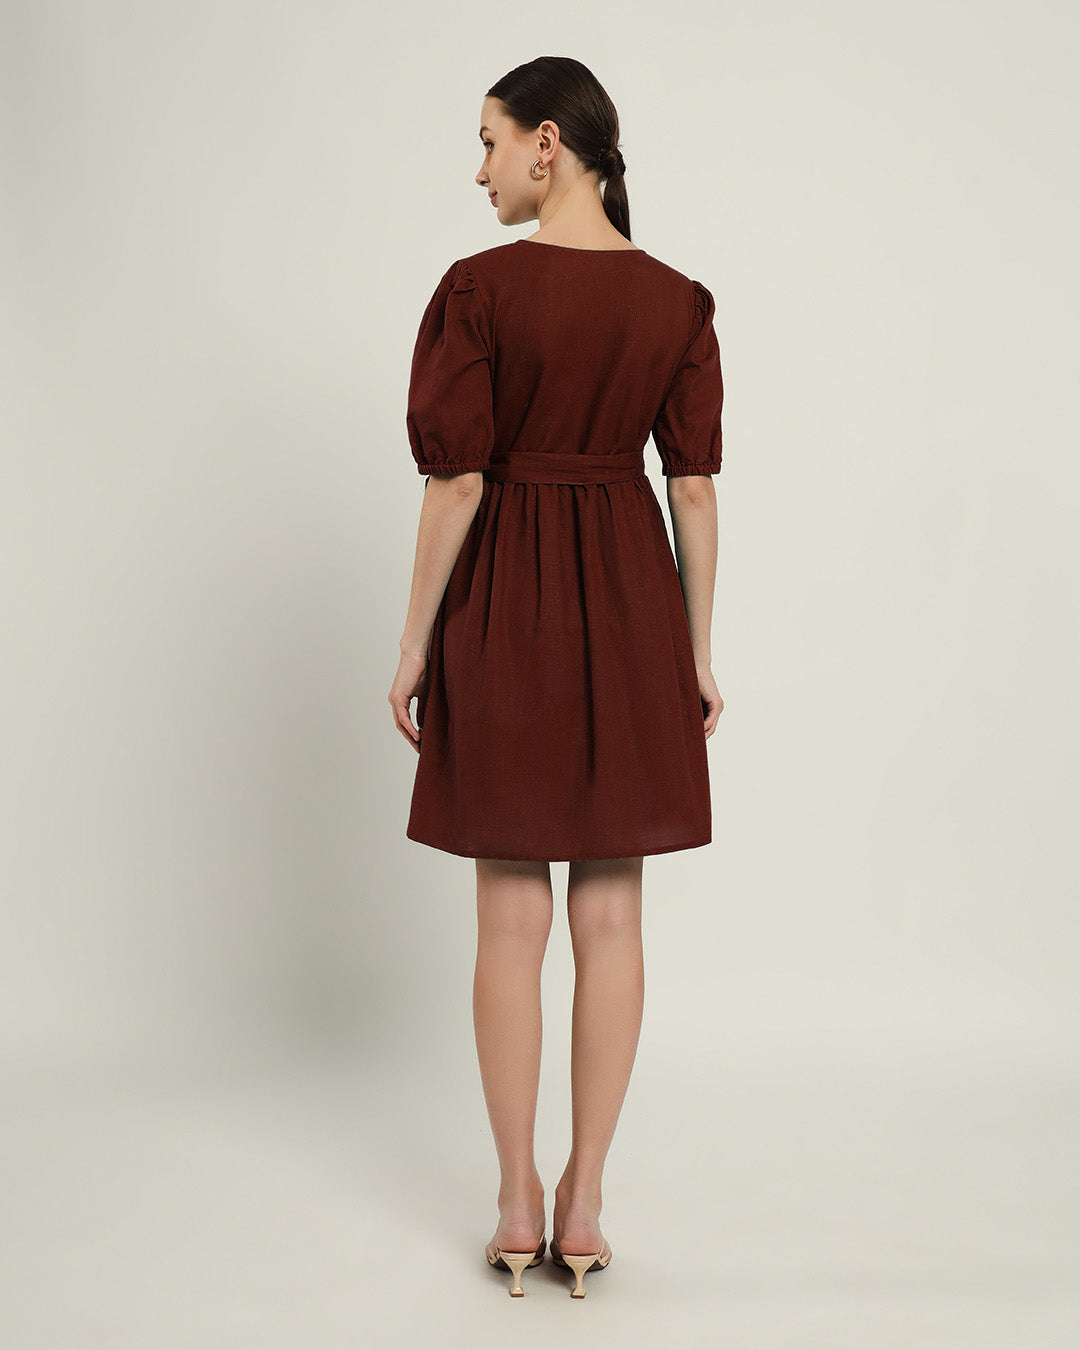 The Inzai Rouge Dress